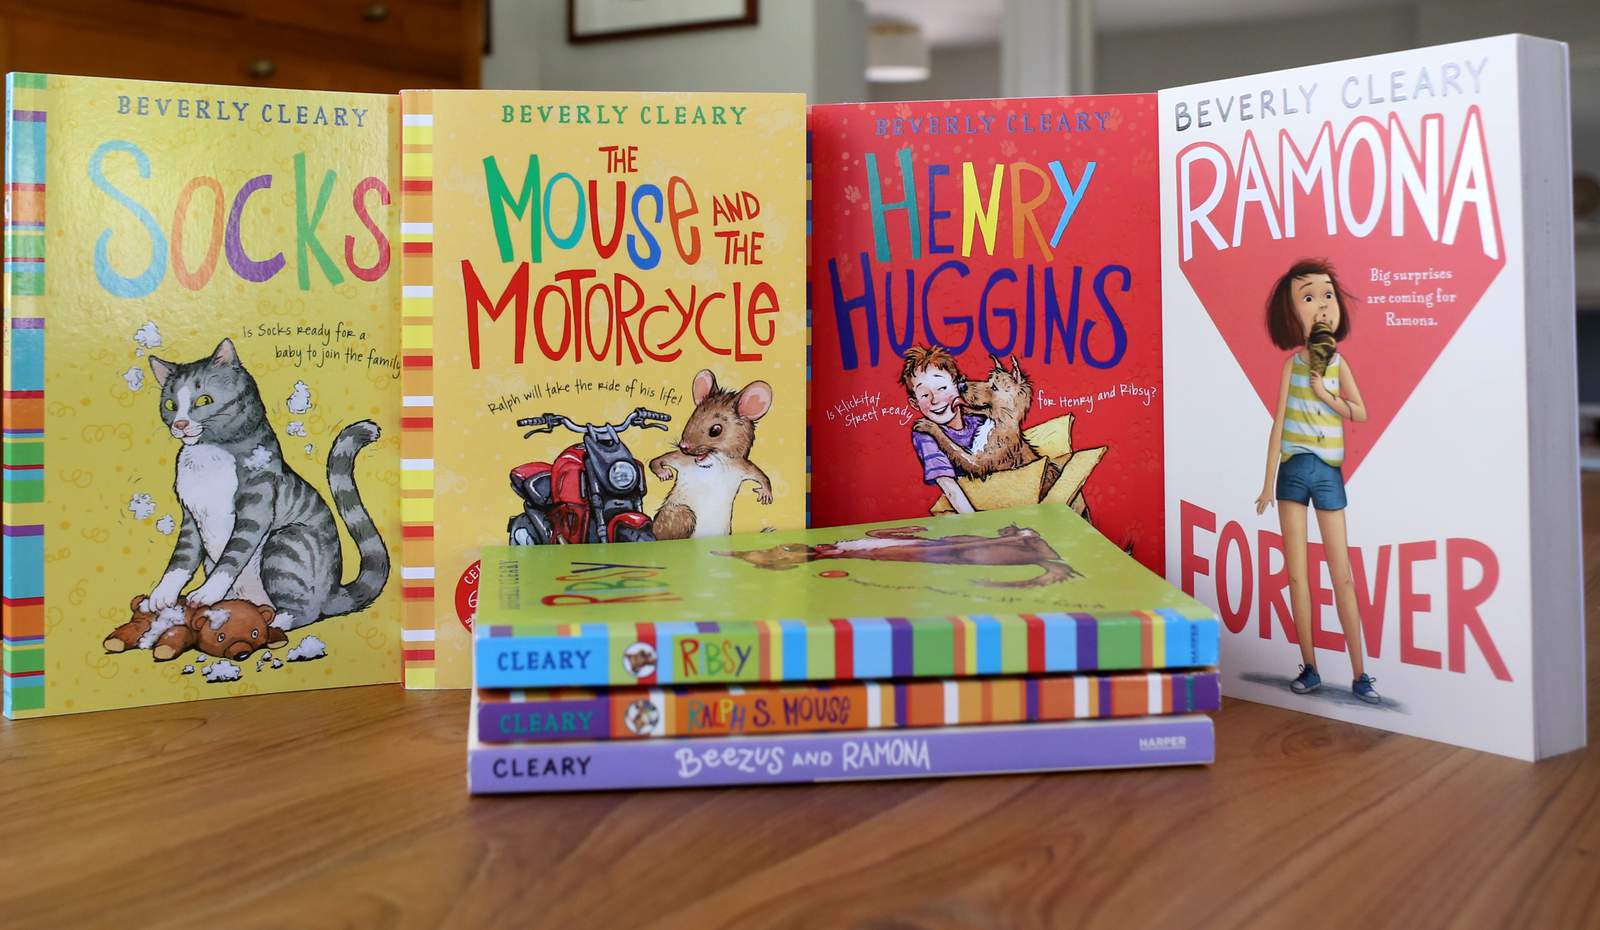 Beloved children’s author Beverly Cleary dies at 104